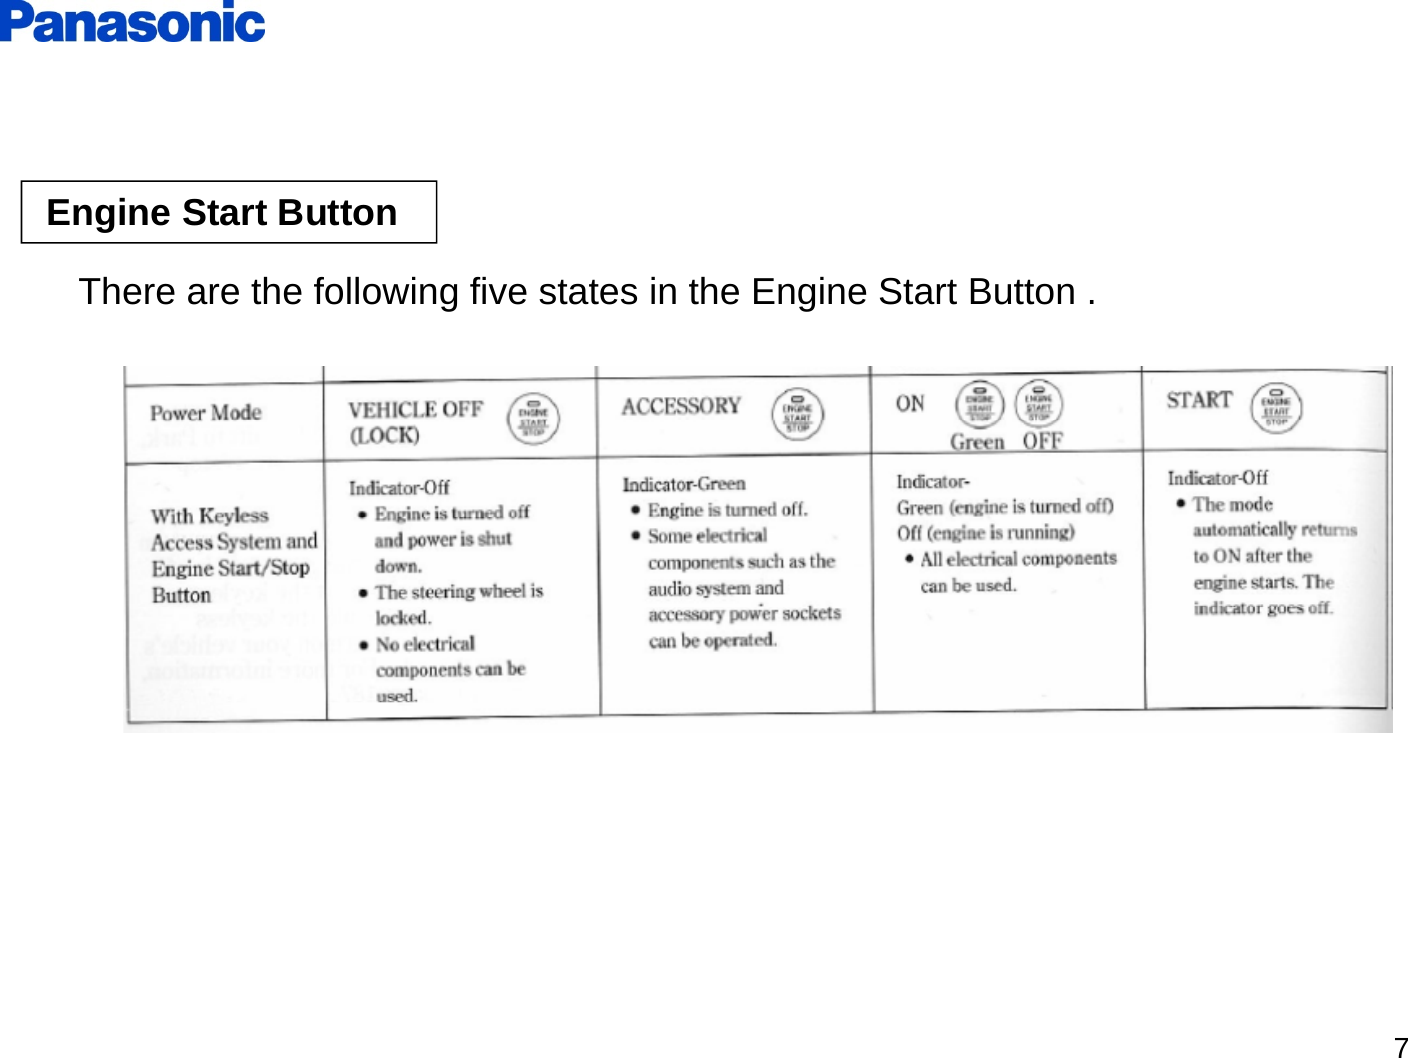 Engine Start Button Th th f ll i fi t t i th E i St t B ttThere are the following five states in the Engine Start Button .7